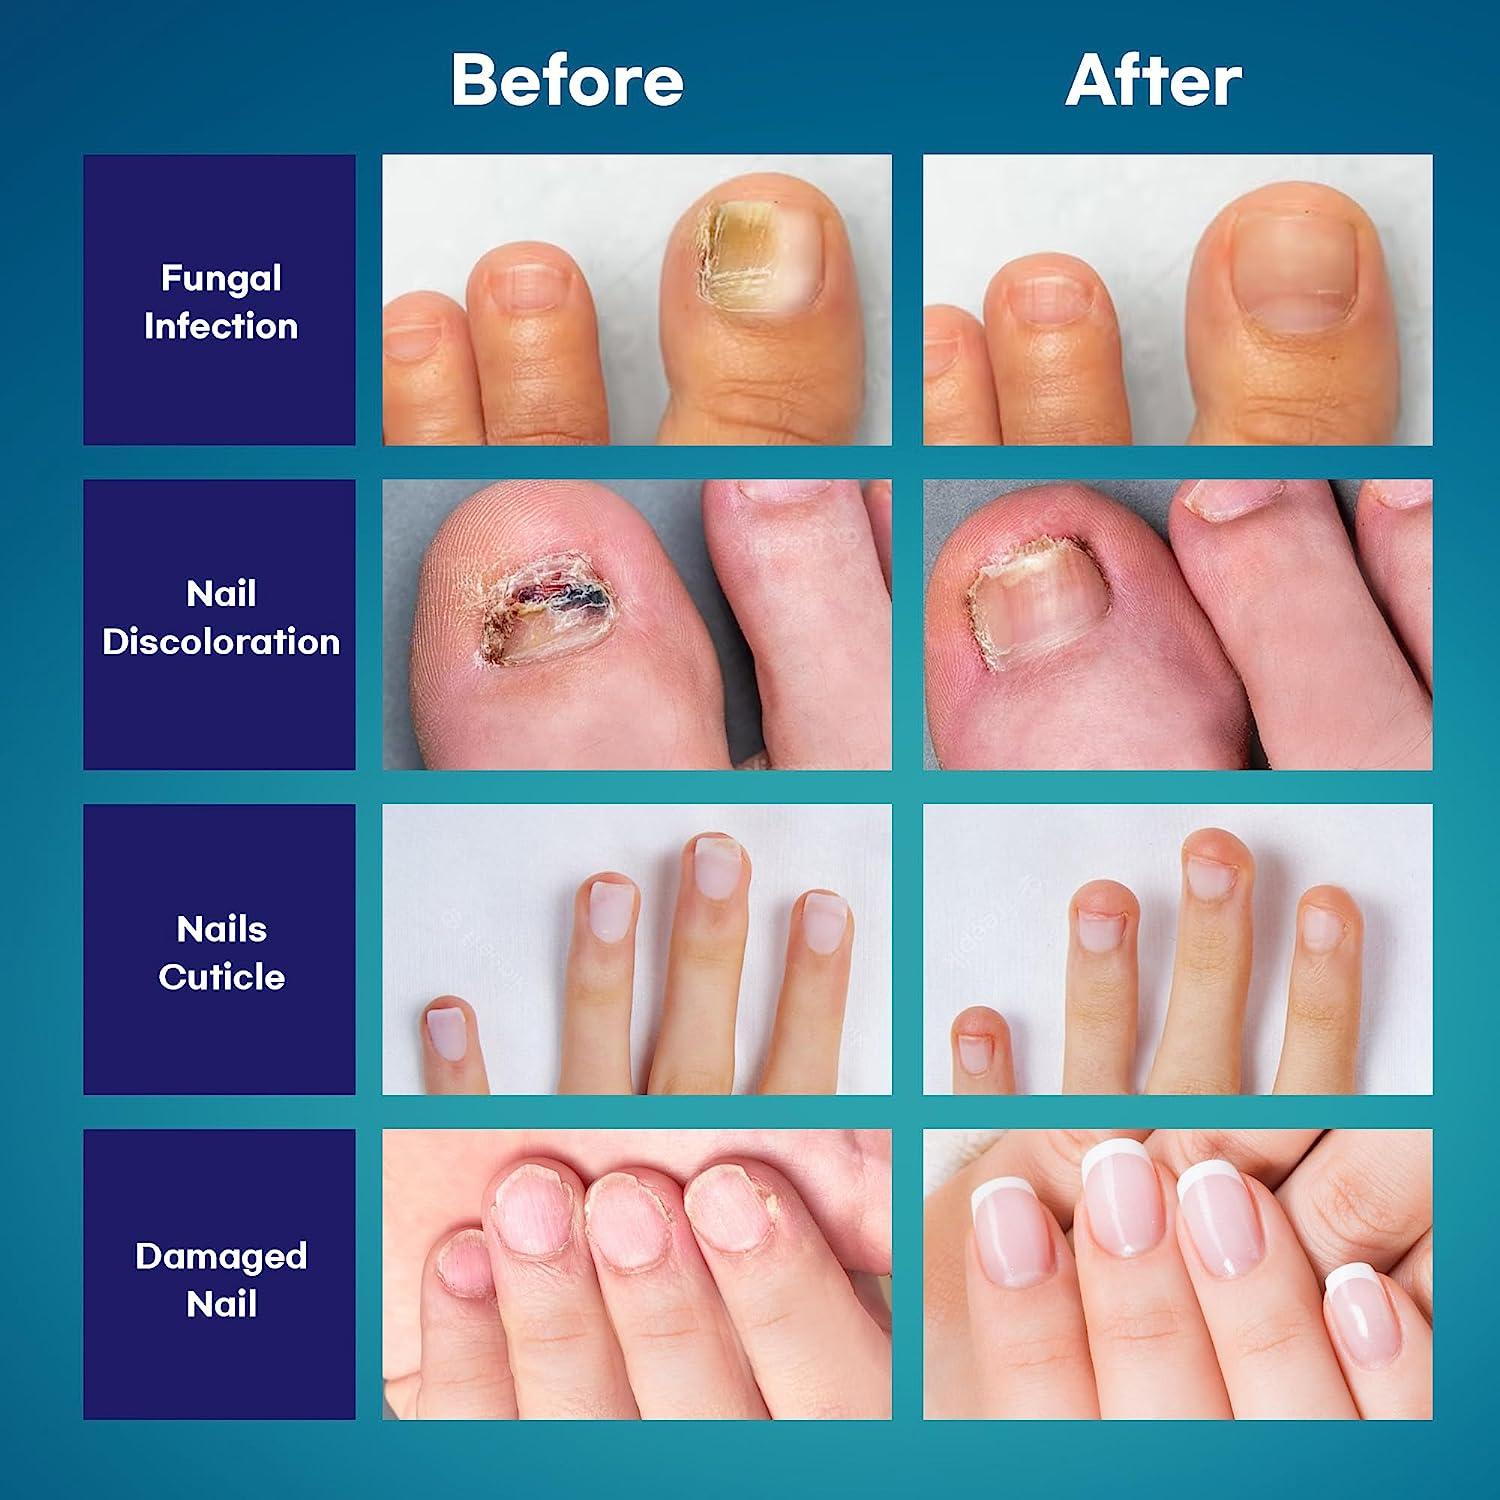 How to treat damaged nails, depending on your concern – Kester Black New  Zealand